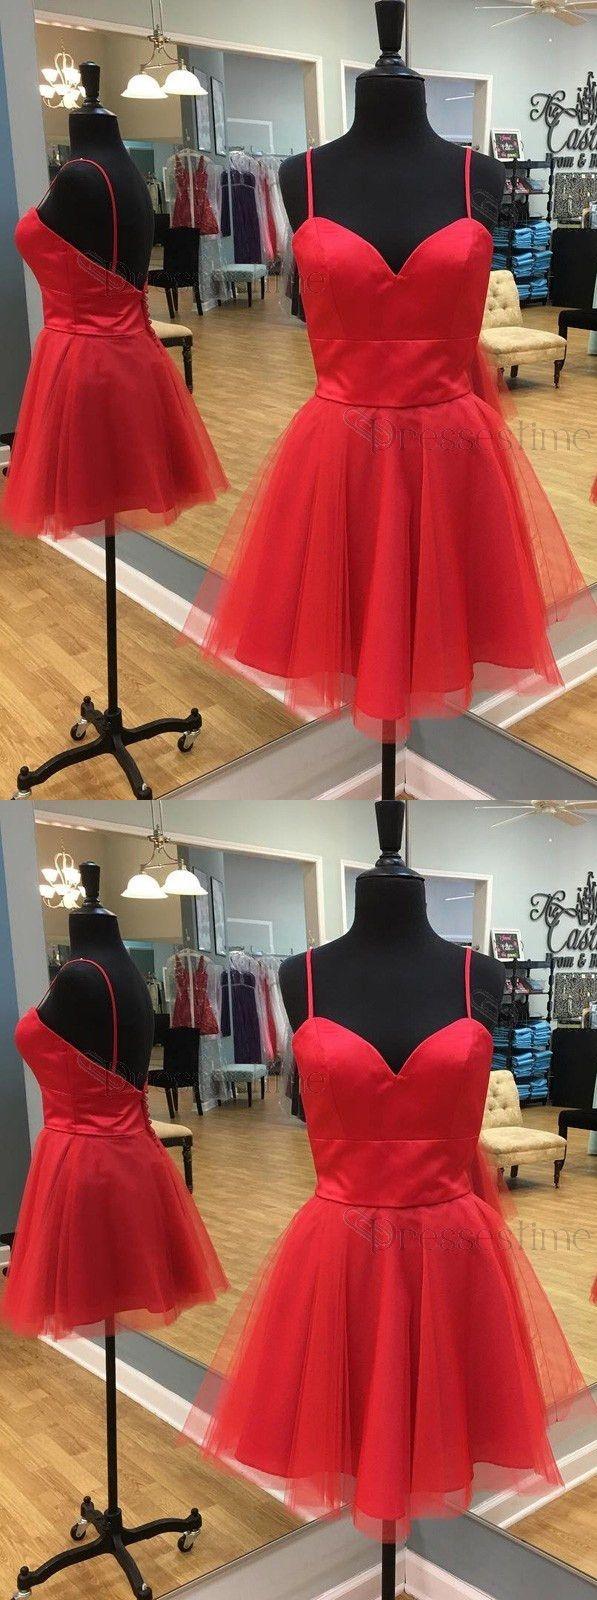 Wedding - A-Line Spaghetti Straps Backless Red Tulle Short Homecoming Dress